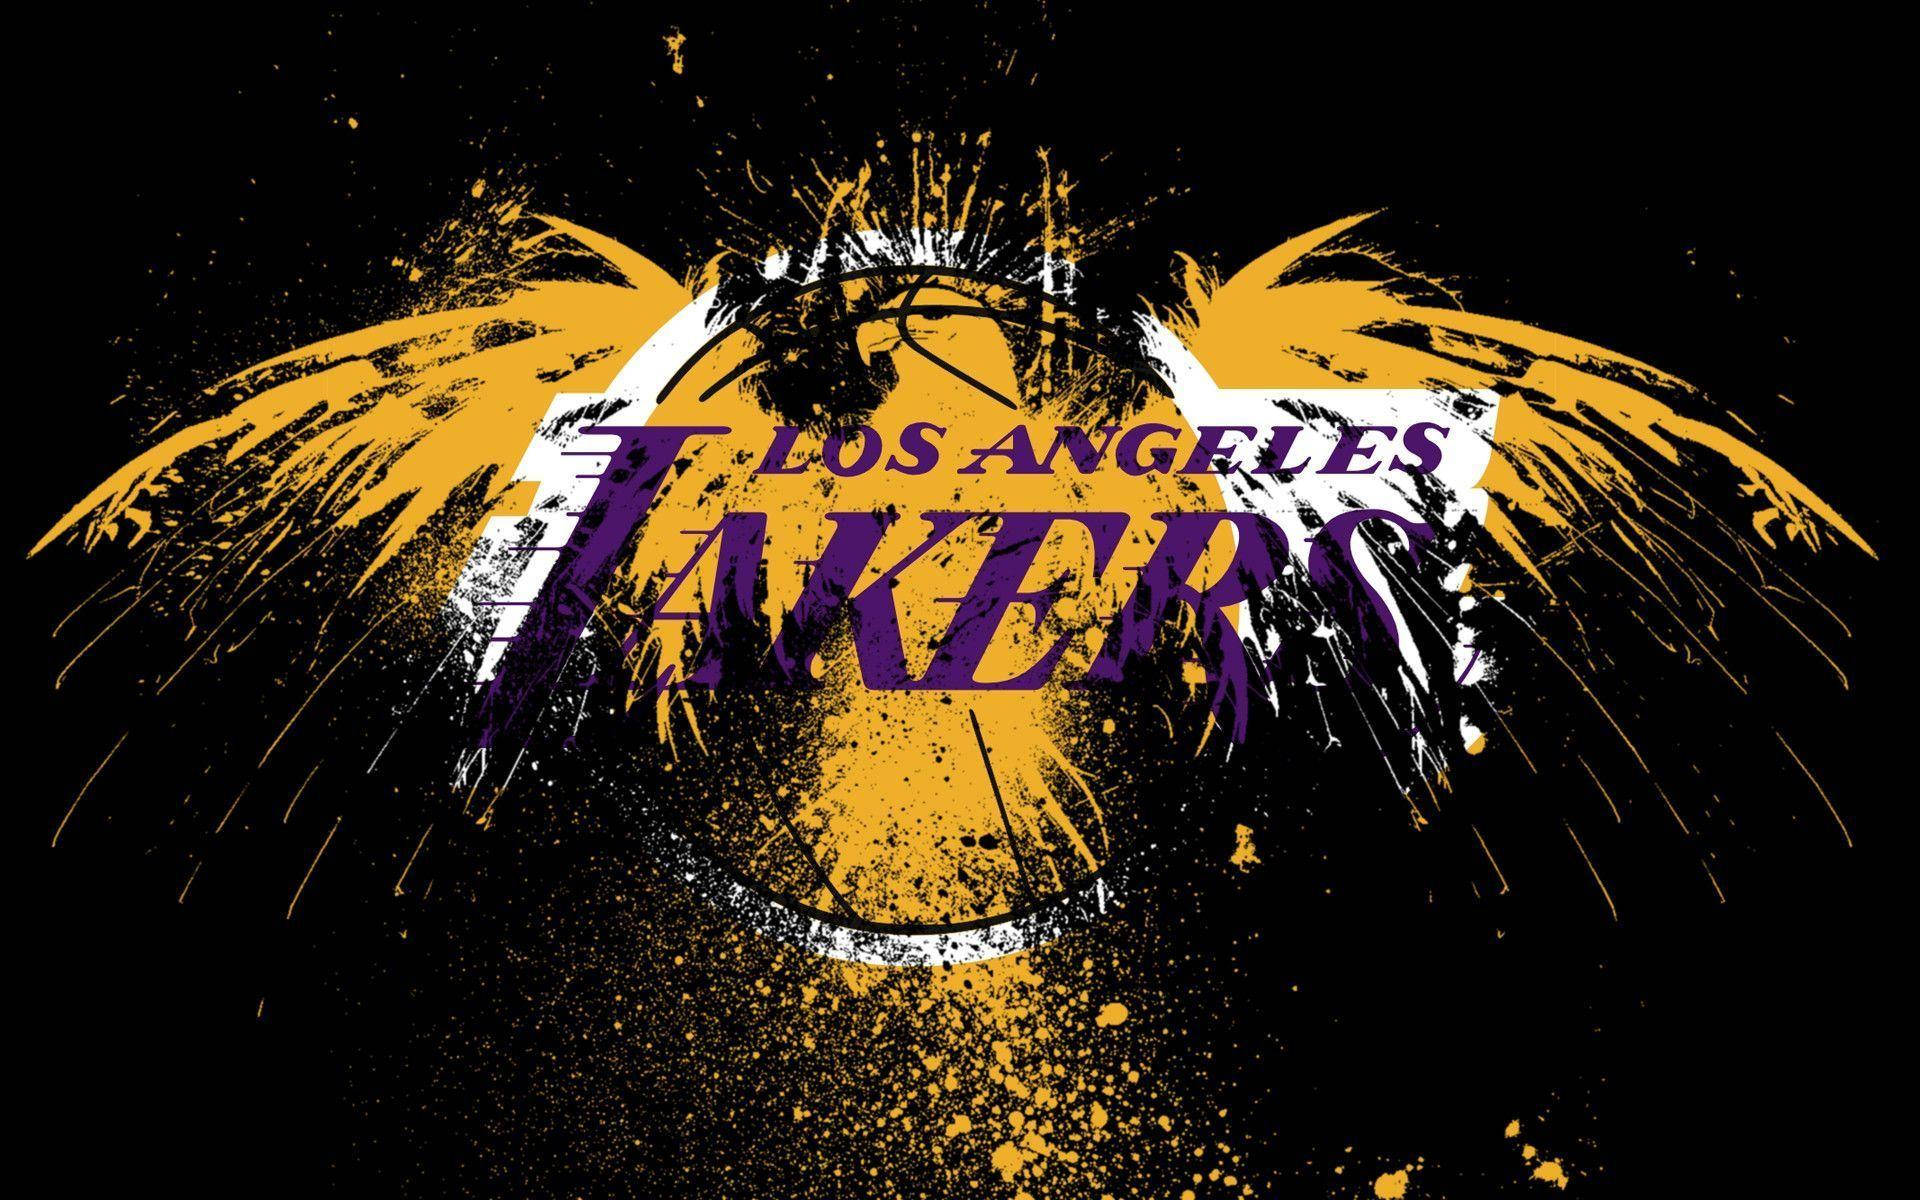 "The Los Angeles Lakers soar to the skies!" Wallpaper